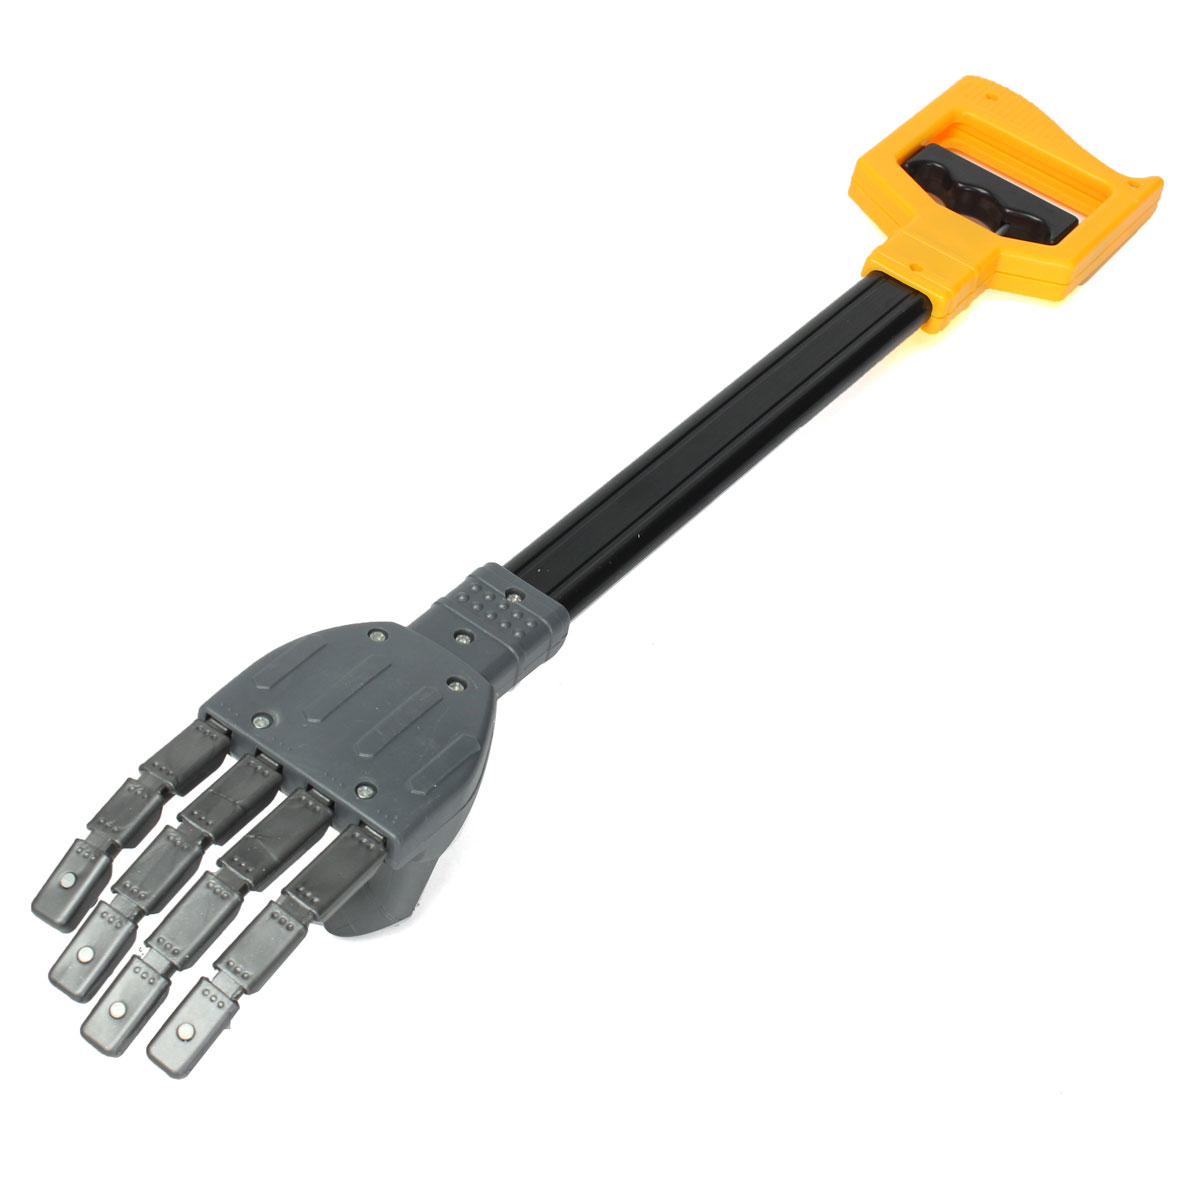 robot claw grabber toy